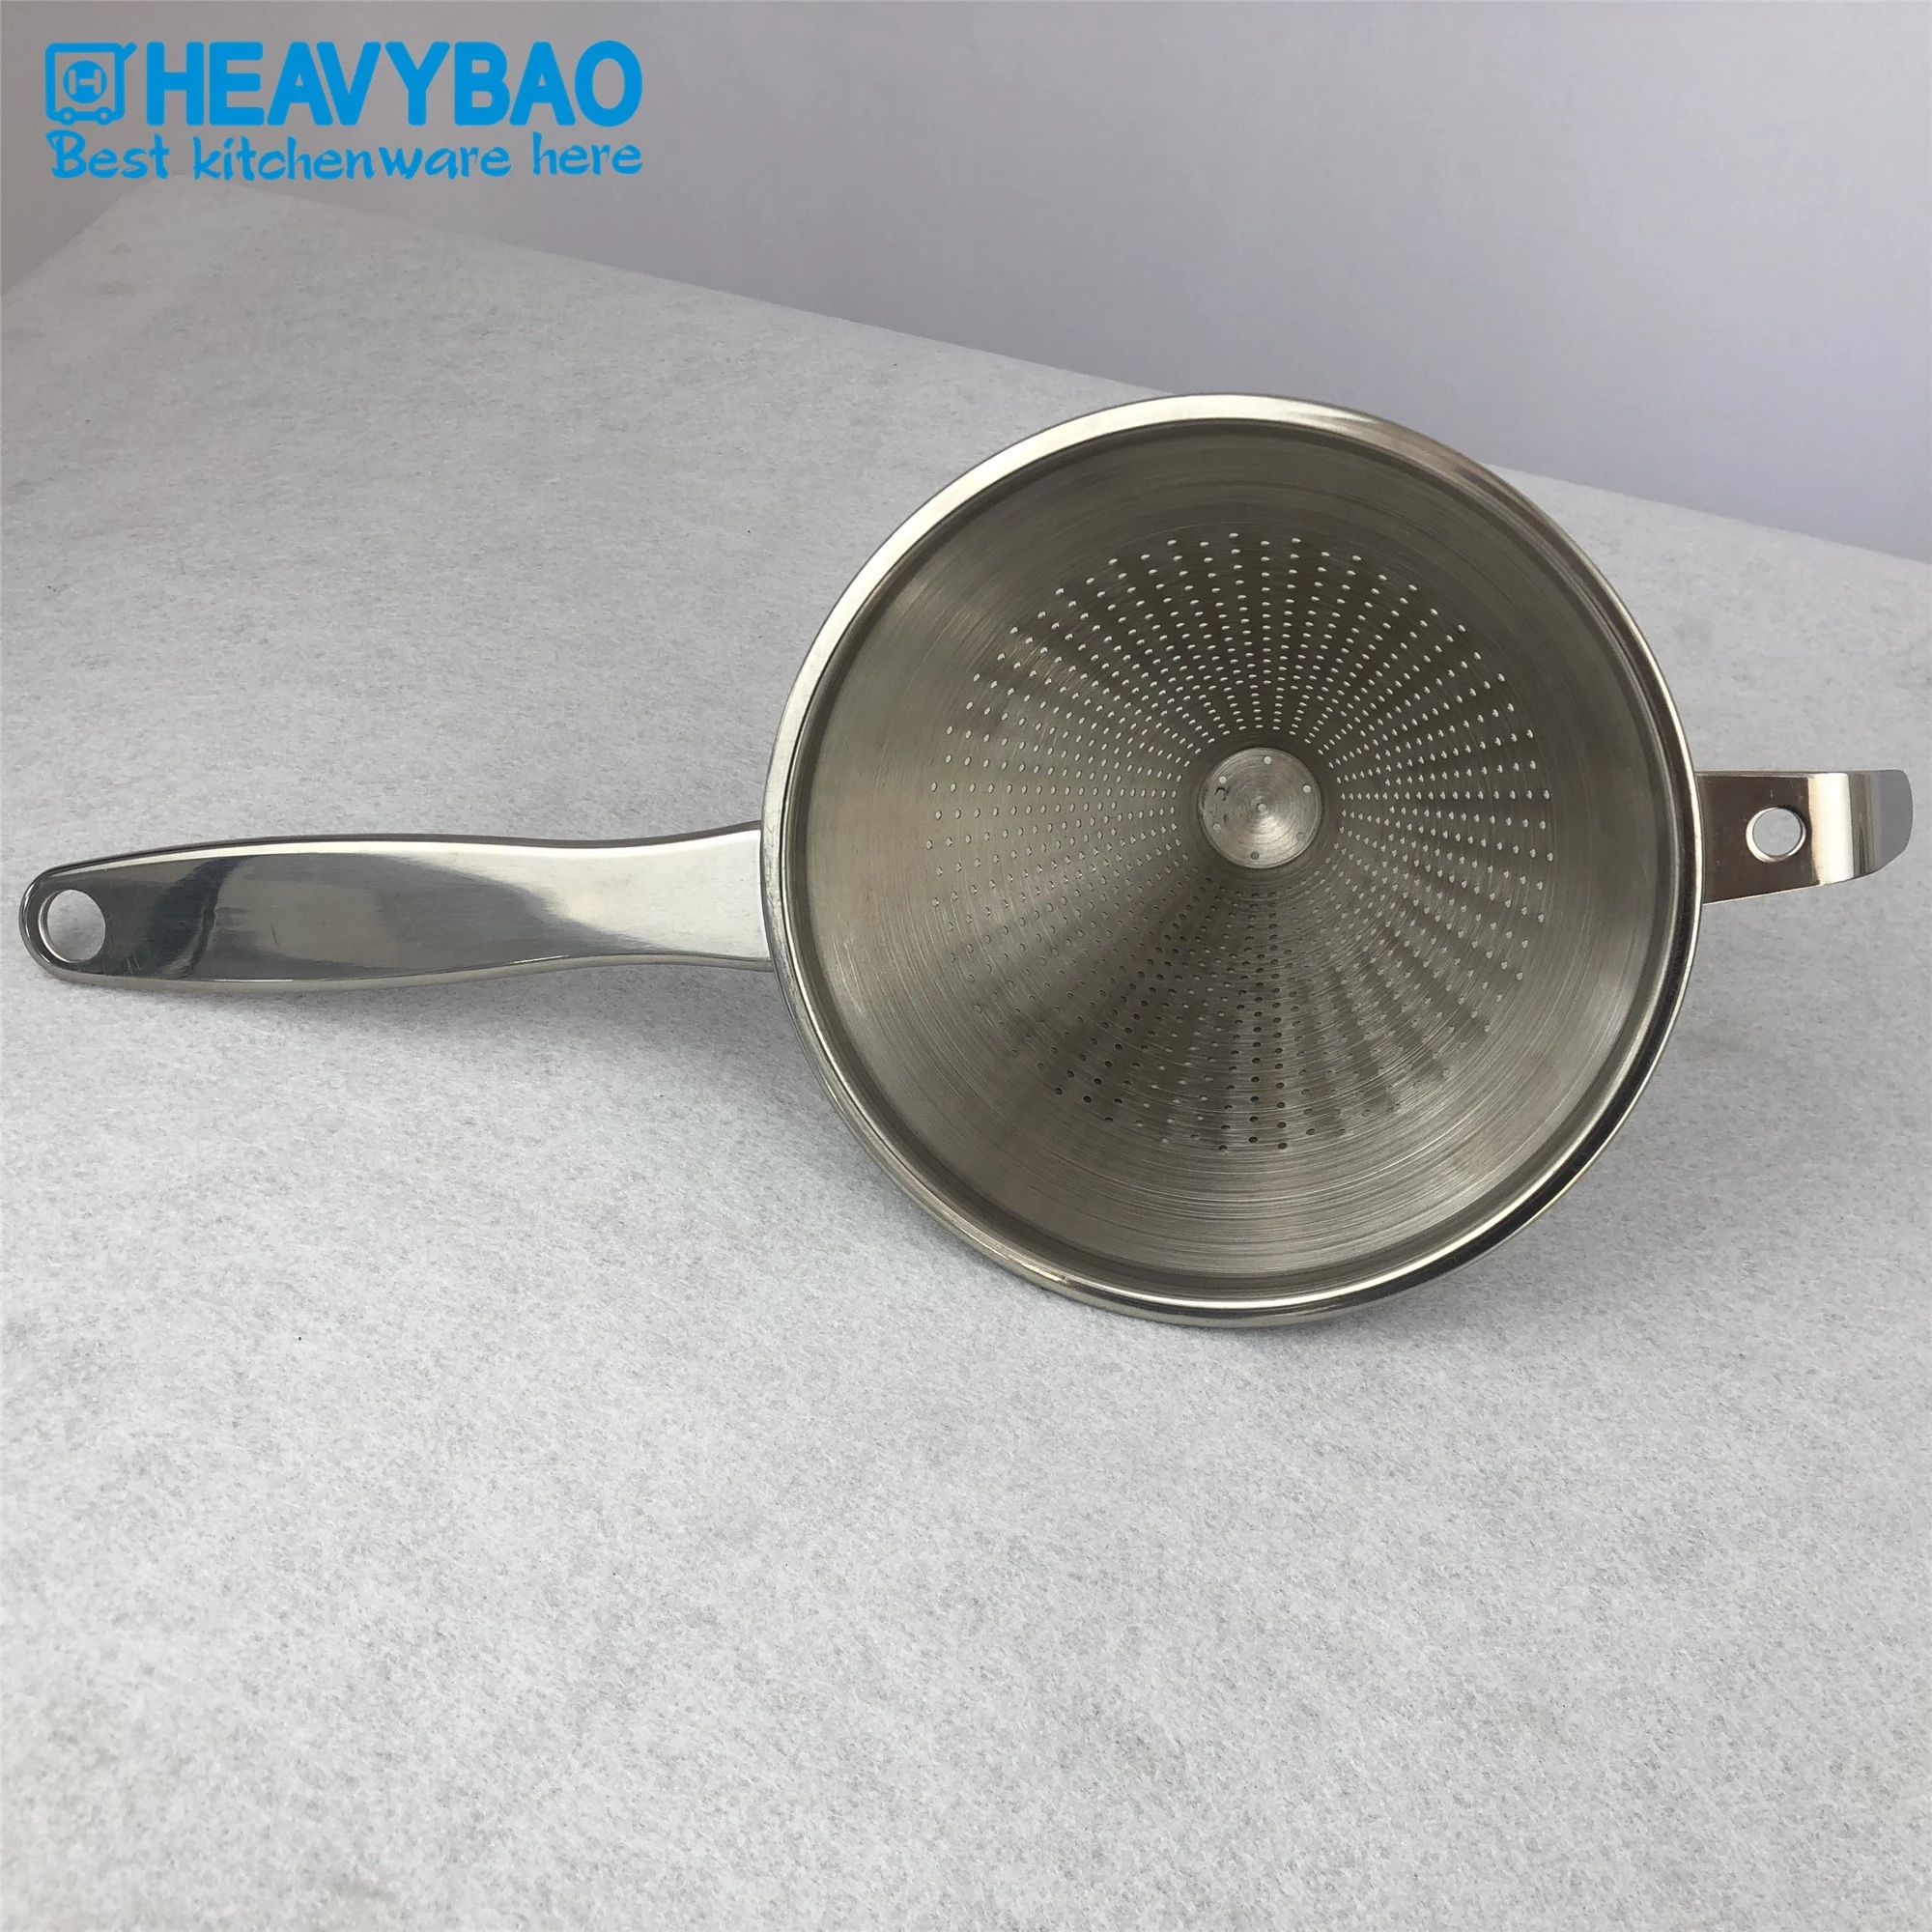 https://img2.tradewheel.com/uploads/images/products/8/0/heavybao-high-quality-stainless-steel-42oz-conical-strainer-kitchen-soup-conical-strainer1-0208287001635667809.jpg.webp